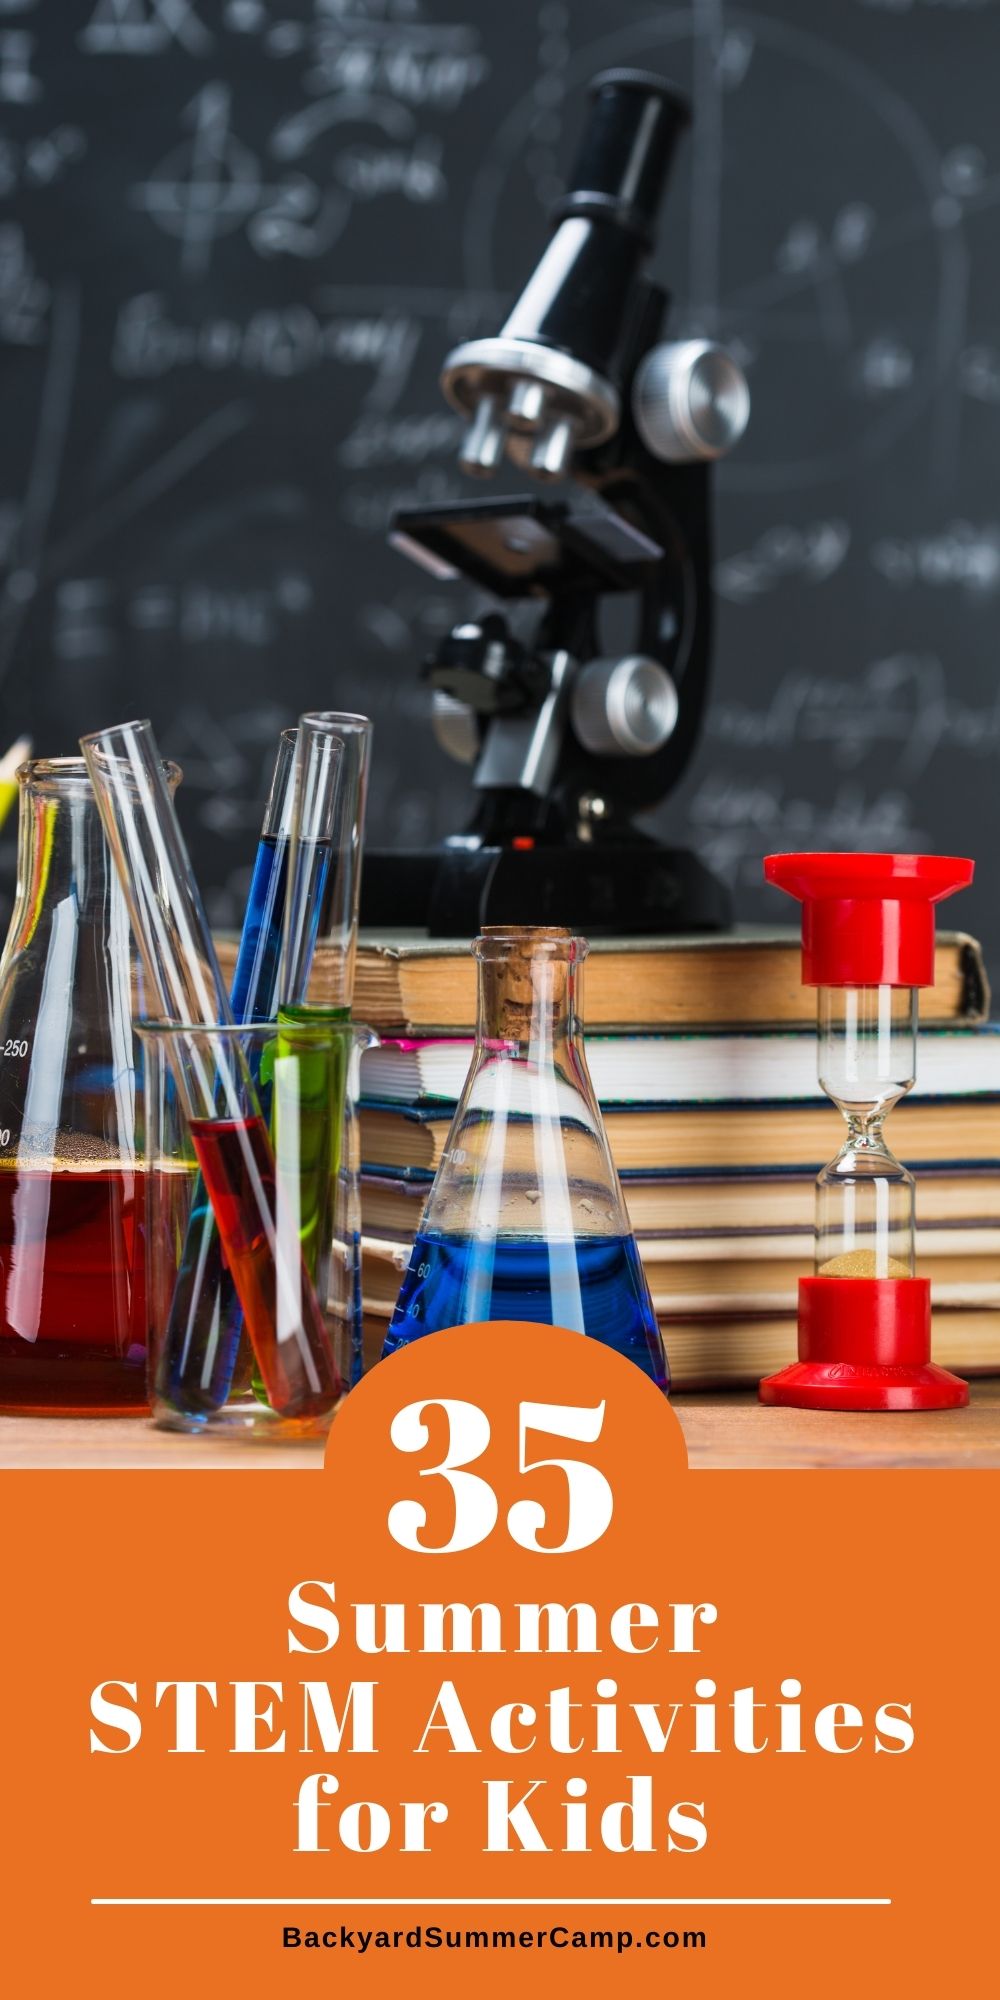 Lab table with books, beakers, and a microscope with text overlay that reads "35 summer STEM activities for kids."